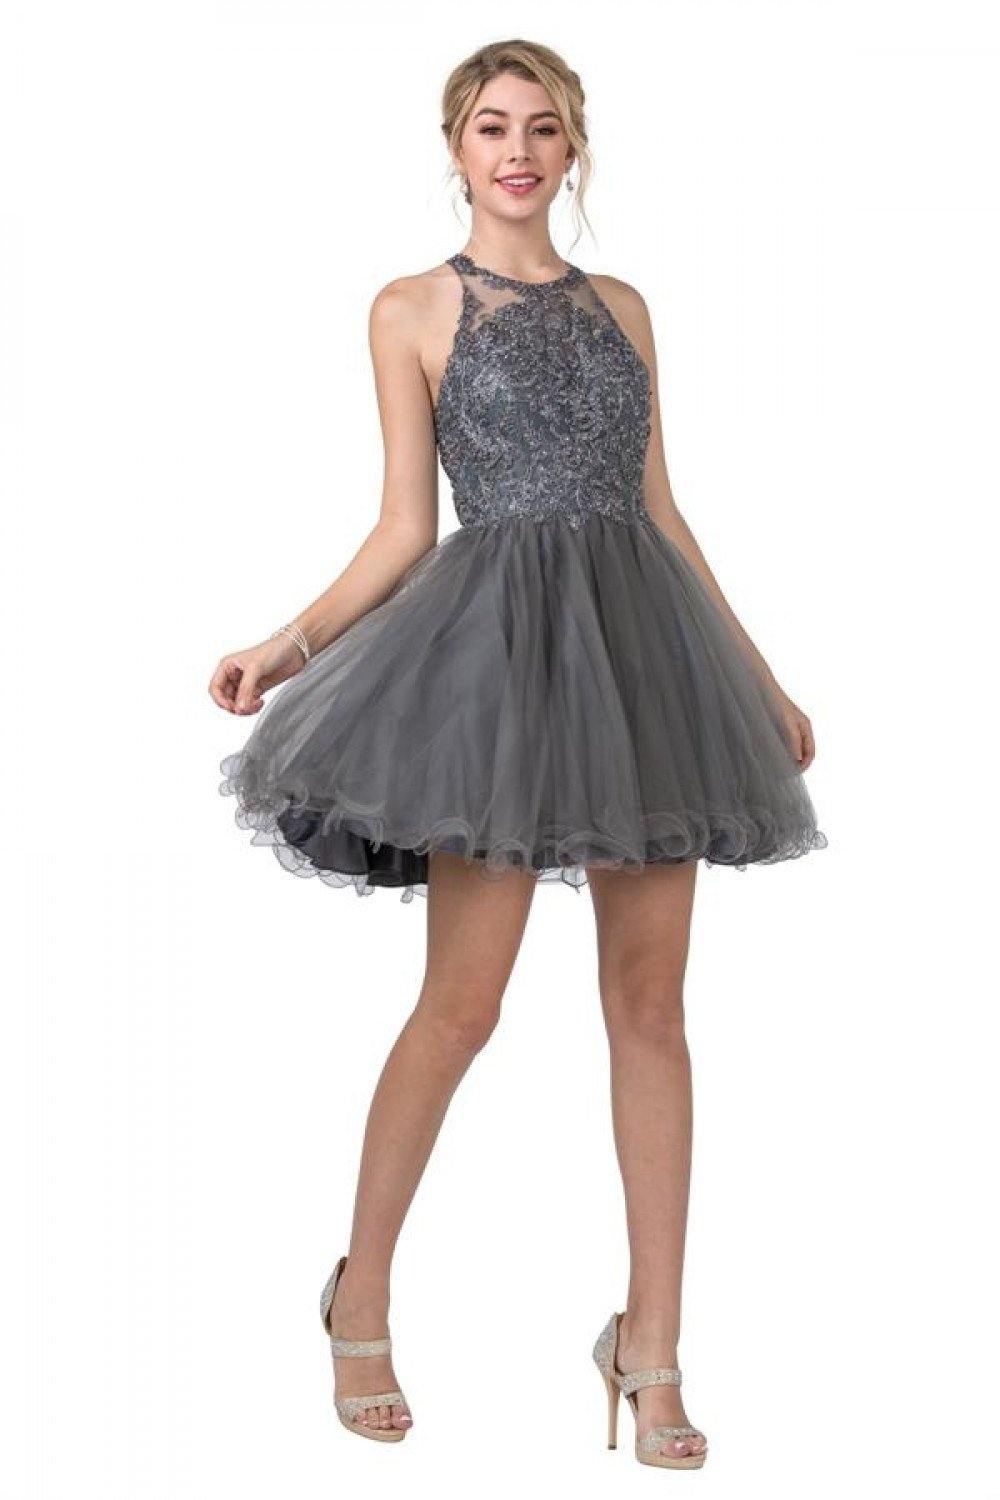 Homecoming Short A-Line Dress - The Dress Outlet ASpeed